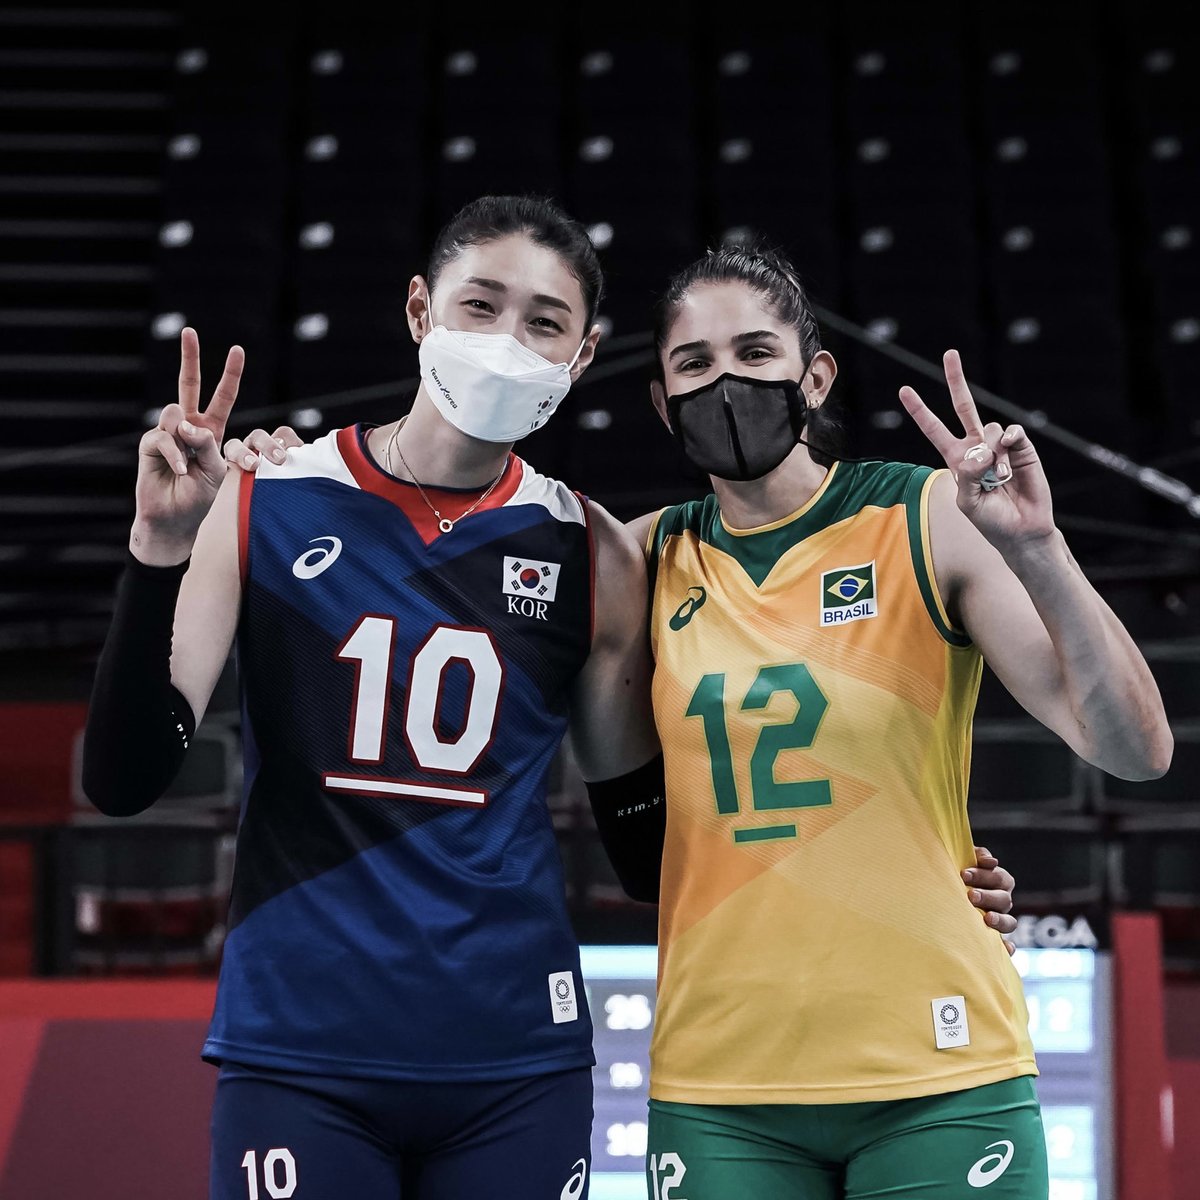 Volleyball World on X: "🏐 BEST FRIENDS KIM 🇰🇷 &amp; NATALIA 🇧🇷! "Kim is really my best friend in #volleyball. I know that I can trust her for the rest of